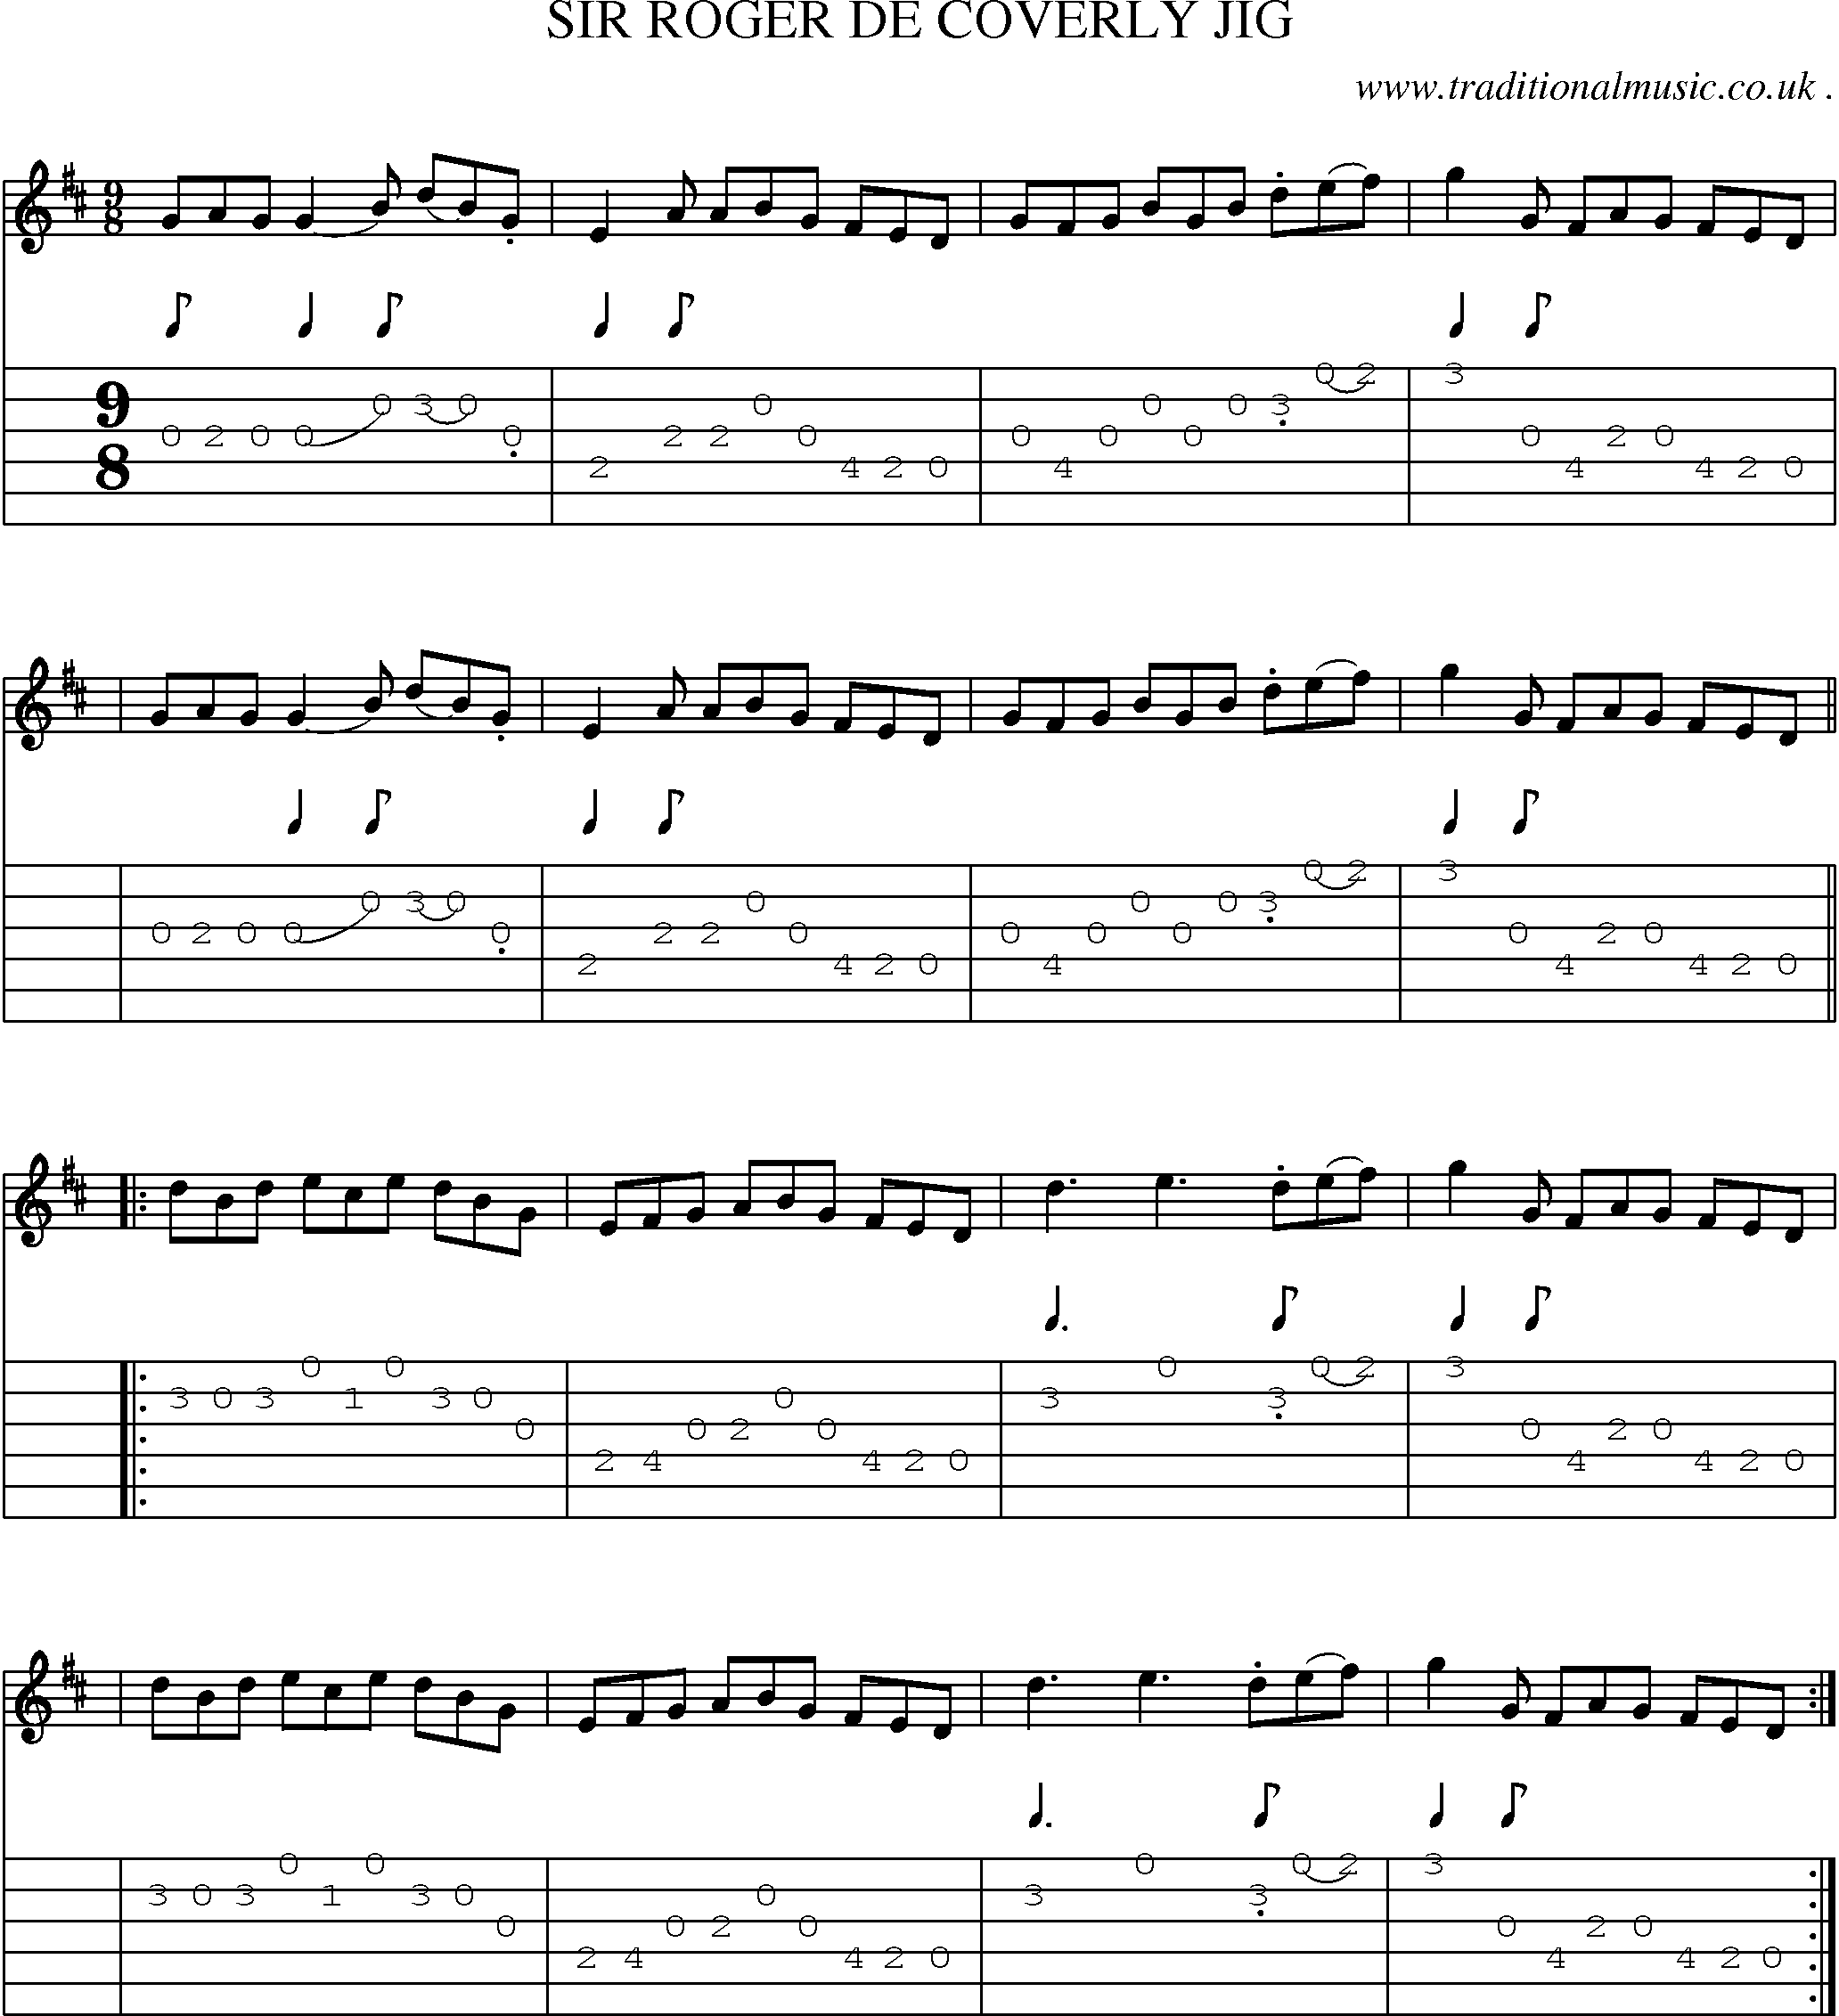 Sheet-Music and Guitar Tabs for Sir Roger De Coverly Jig